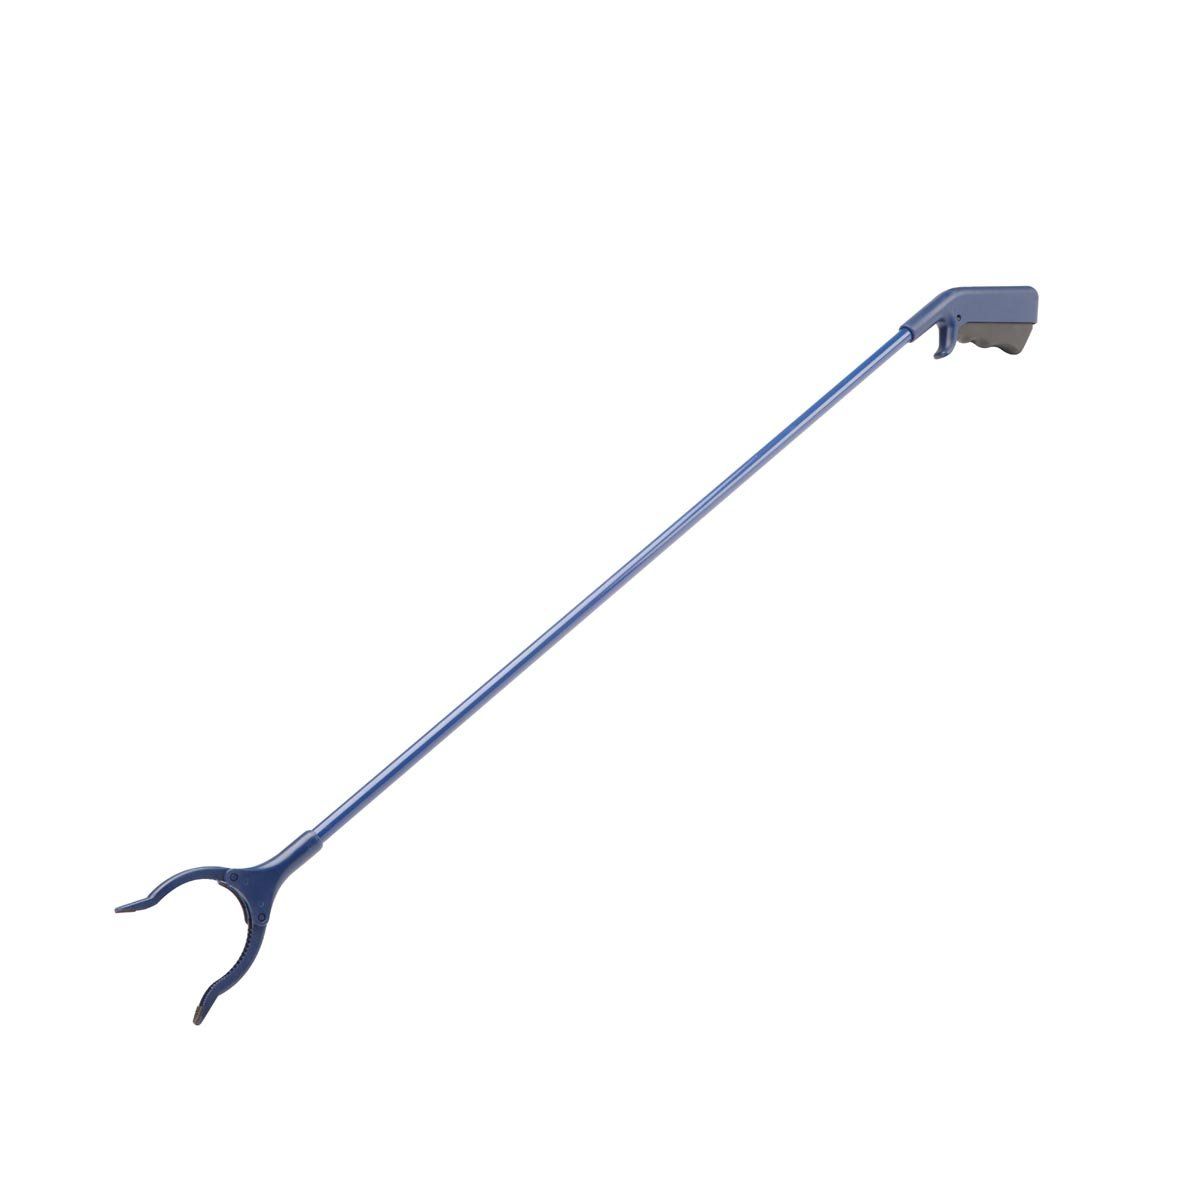 Save your back from strain with this handy long reach pickup tool, made with steel tubing with ABS reinforced material for durability,  for easy grip and a non-slip application, this pickup tool makes short work of long pick up jobs.